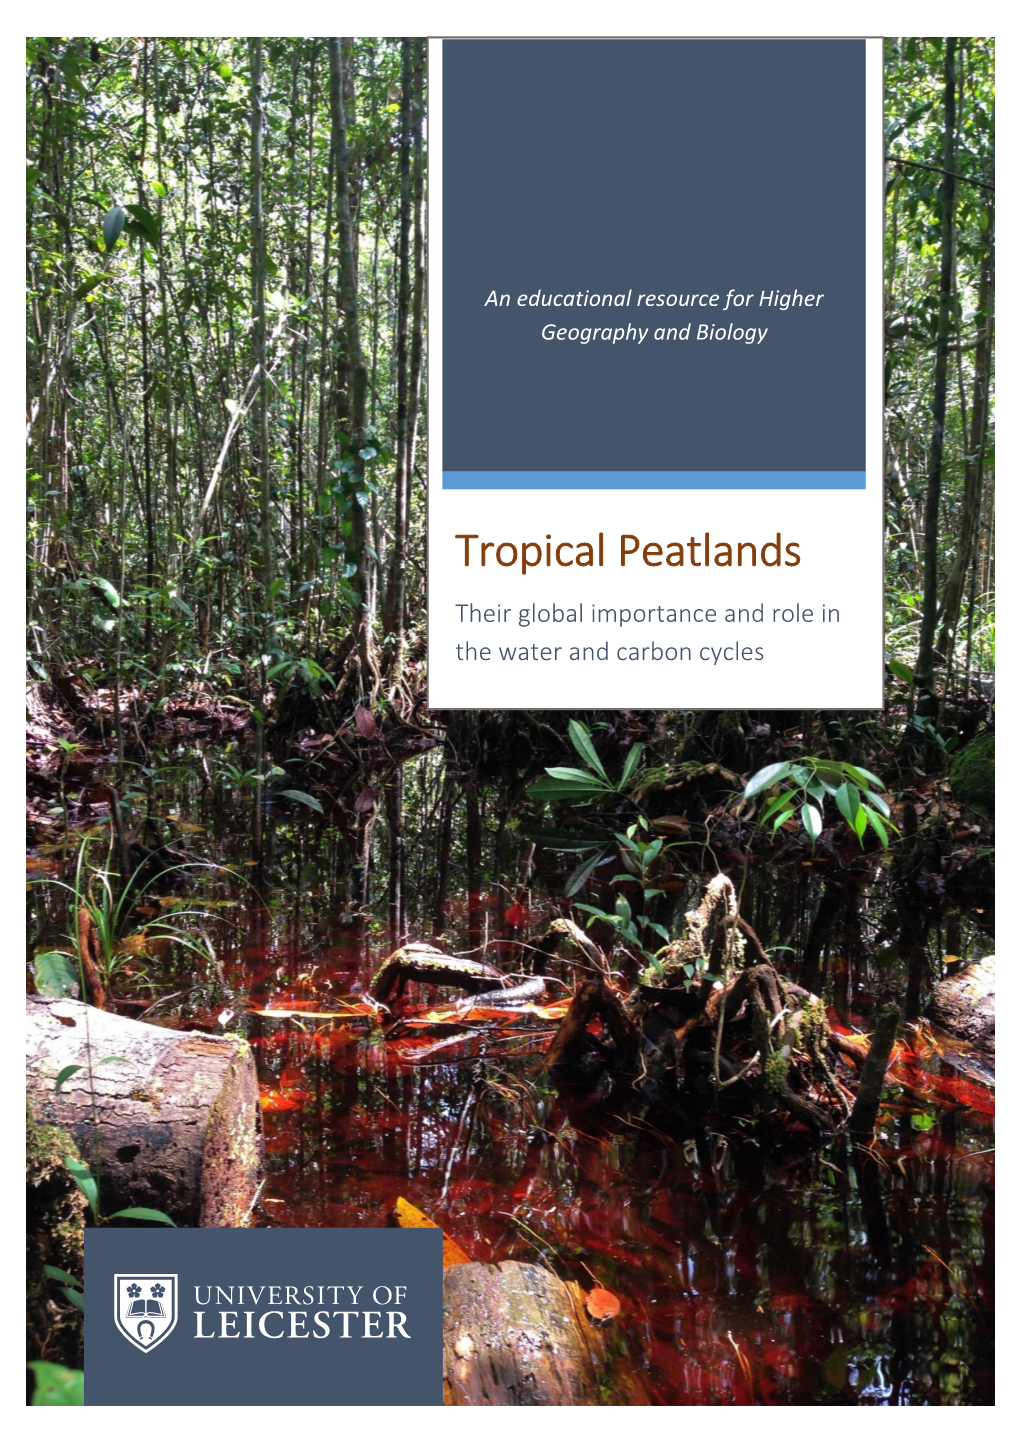 Tropical Peatlands Their Global Importance and Role in the Water and Carbon Cycles